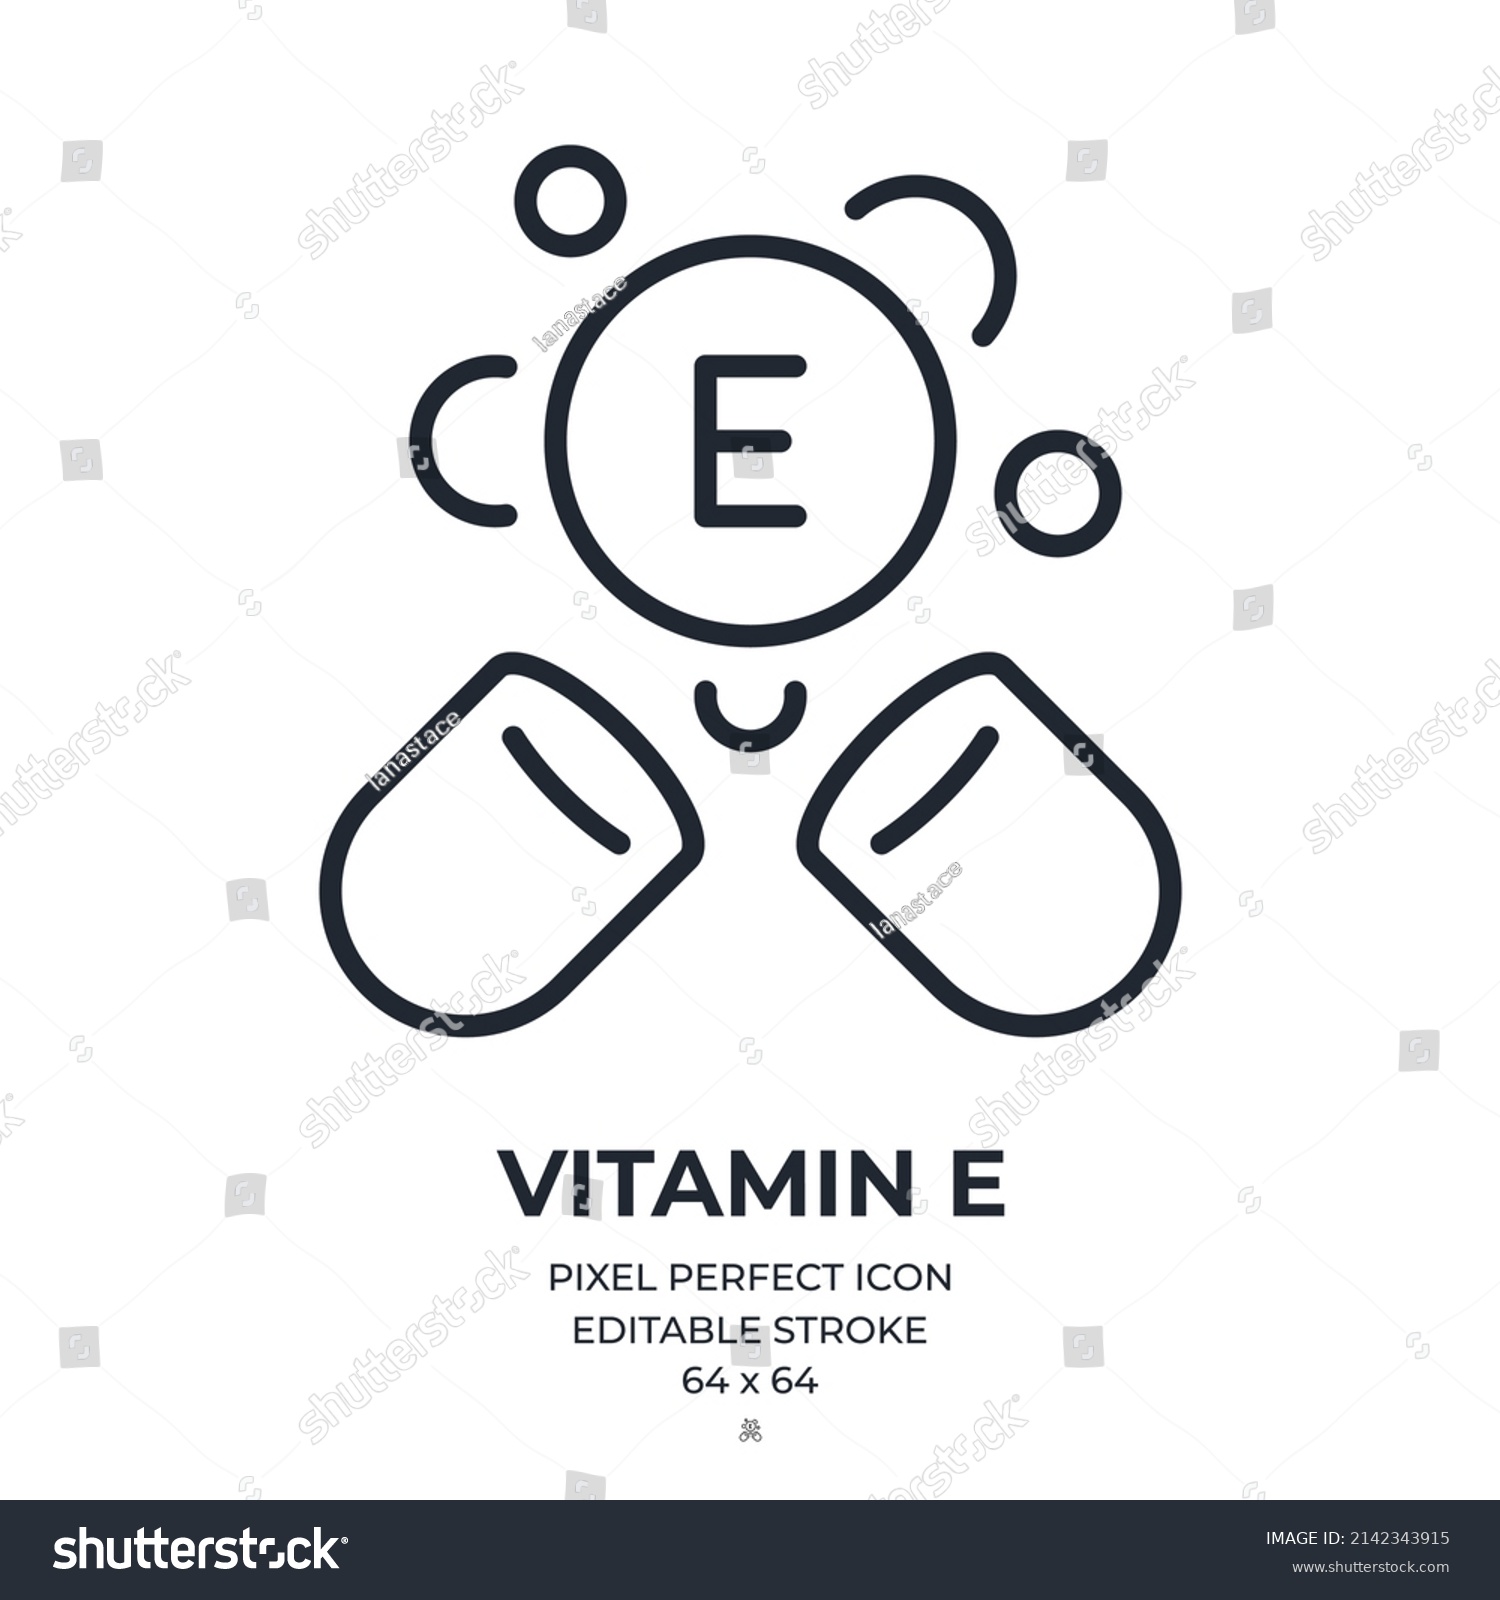 Vitamin E editable stroke outline icon isolated on white background flat vector illustration. Pixel perfect. 64 x 64. #2142343915